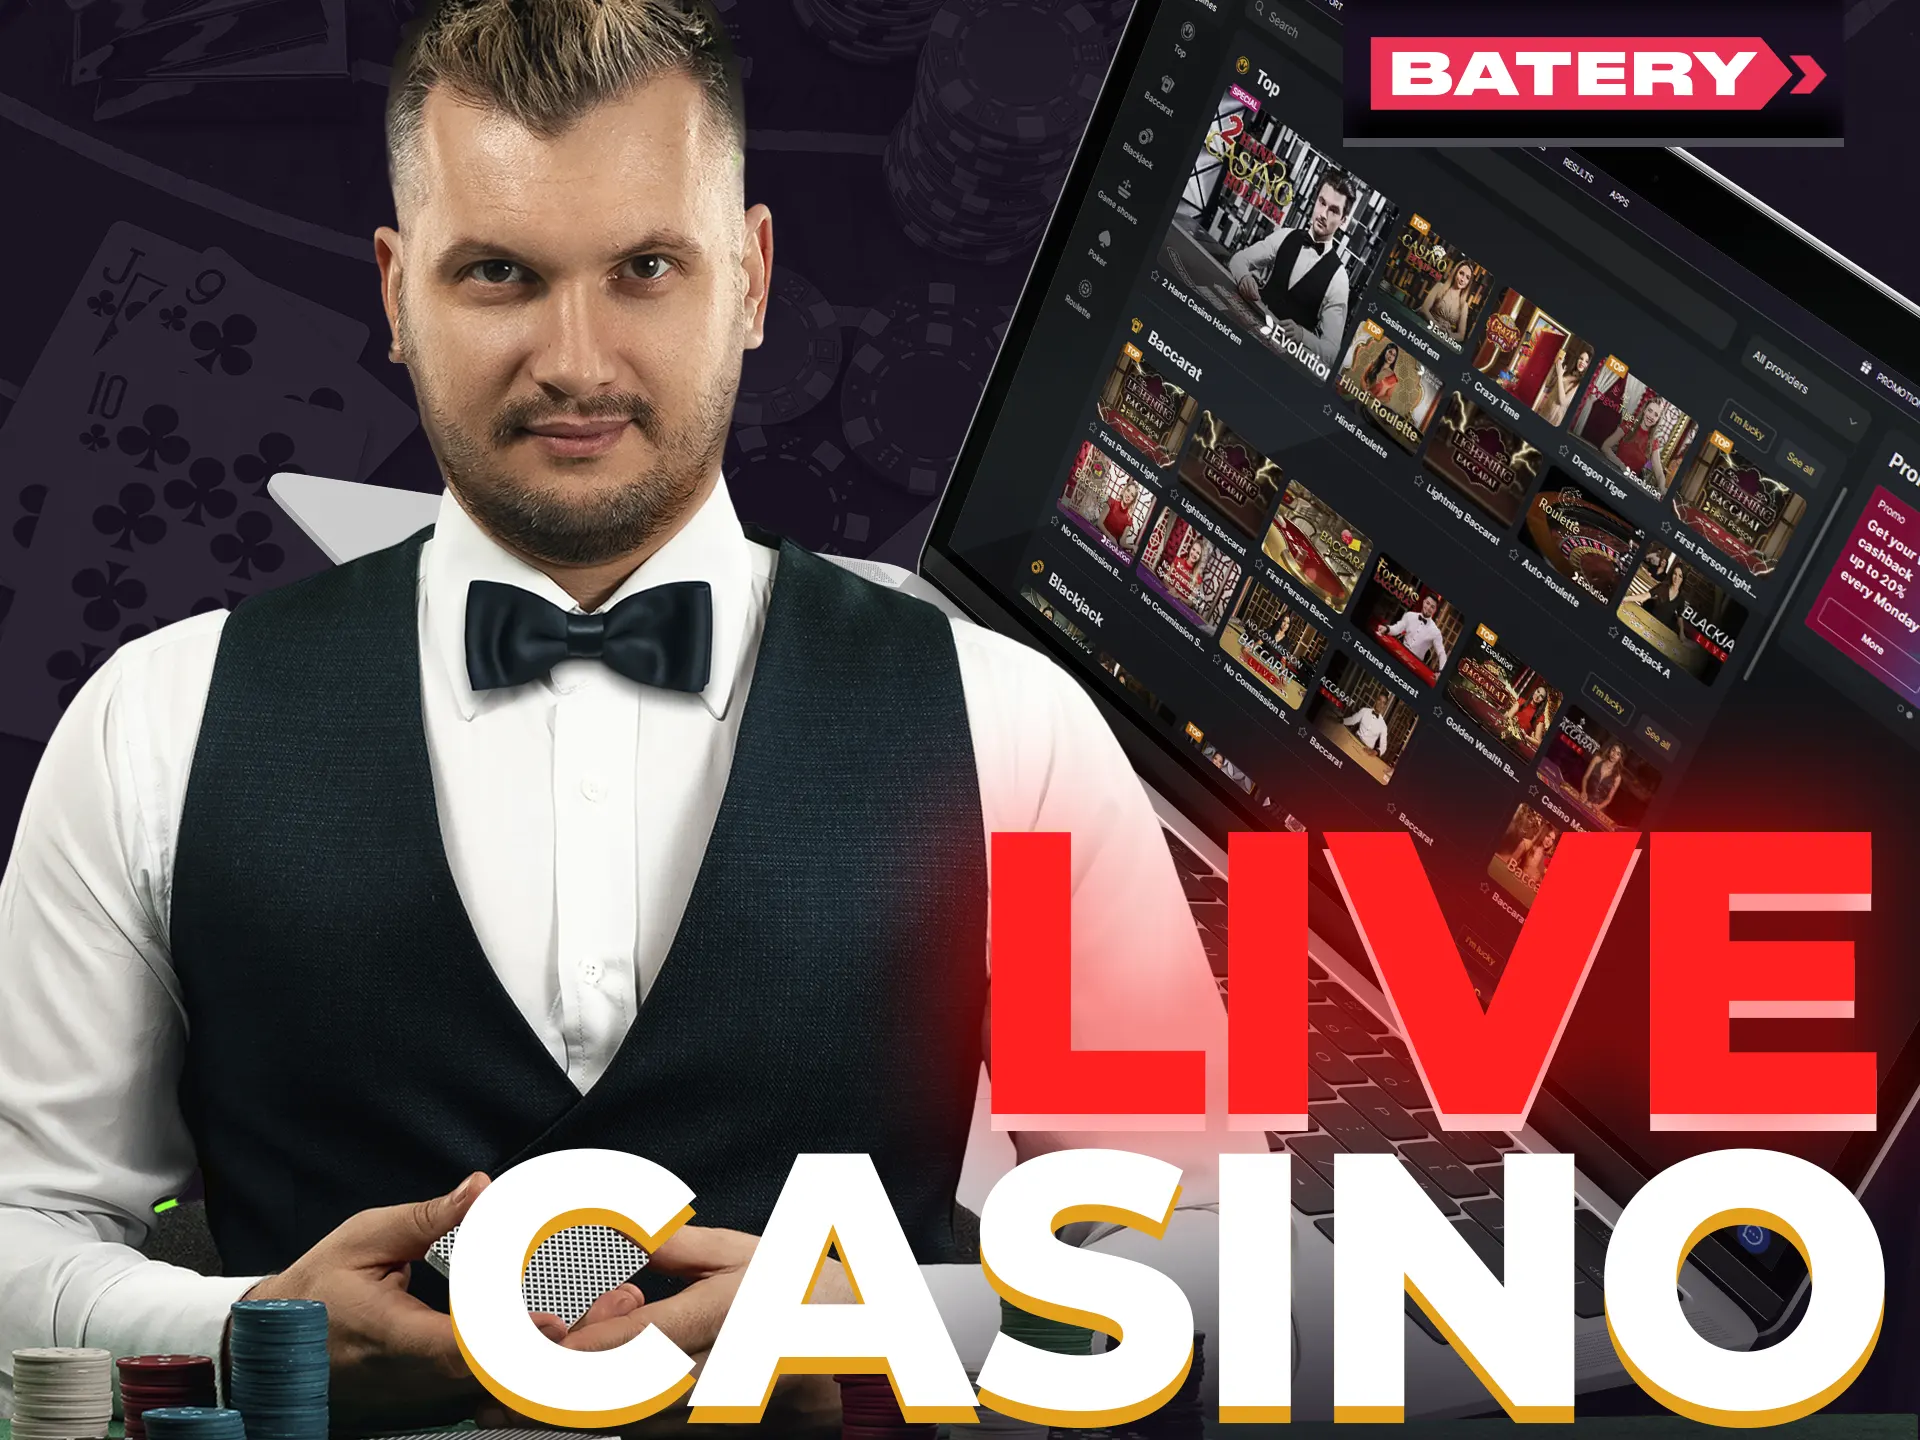 Batery Live Casino offers Baccarat, Andar Bahar, Poker, and Roulette with charming dealers.